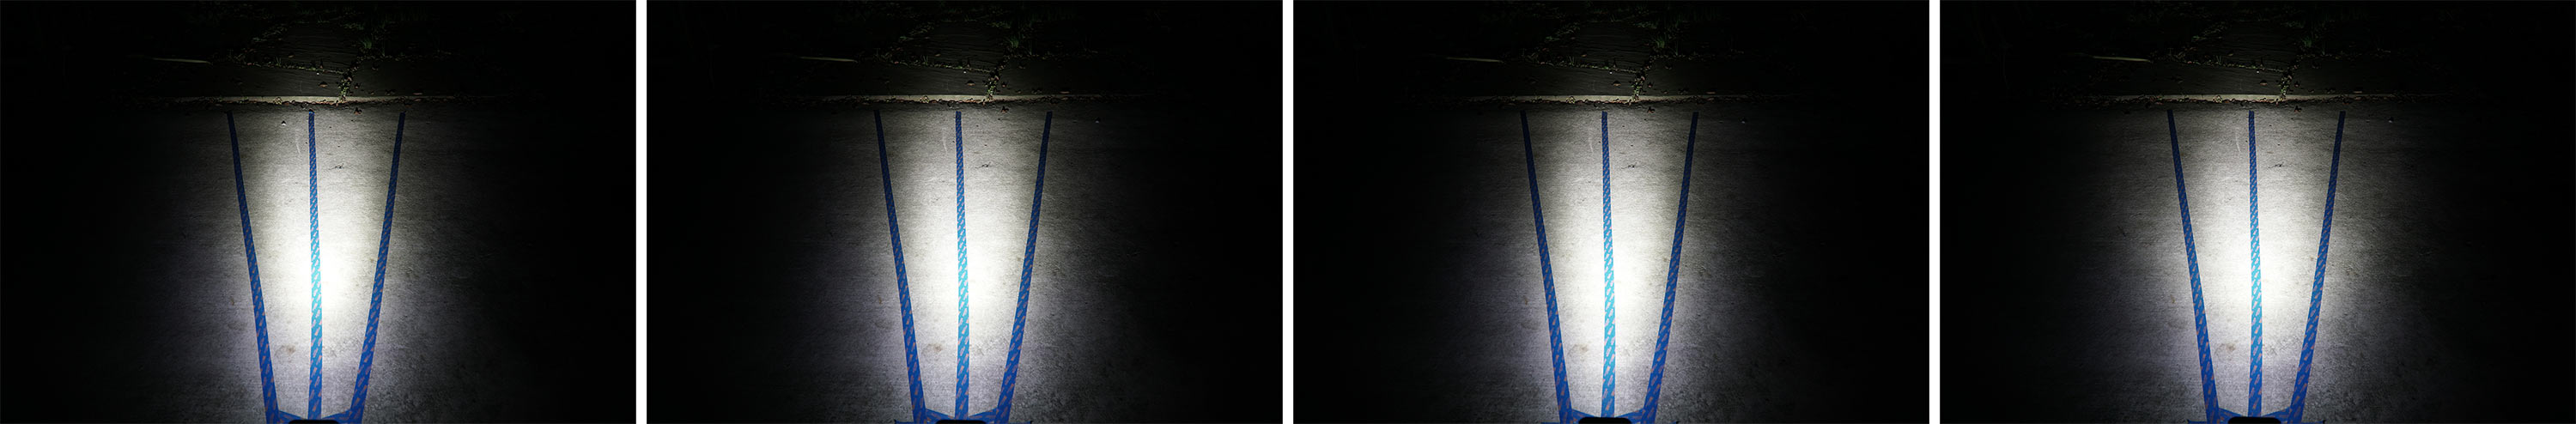 side by side comparison of gloworm xsv beam patterns with each lens optic installed